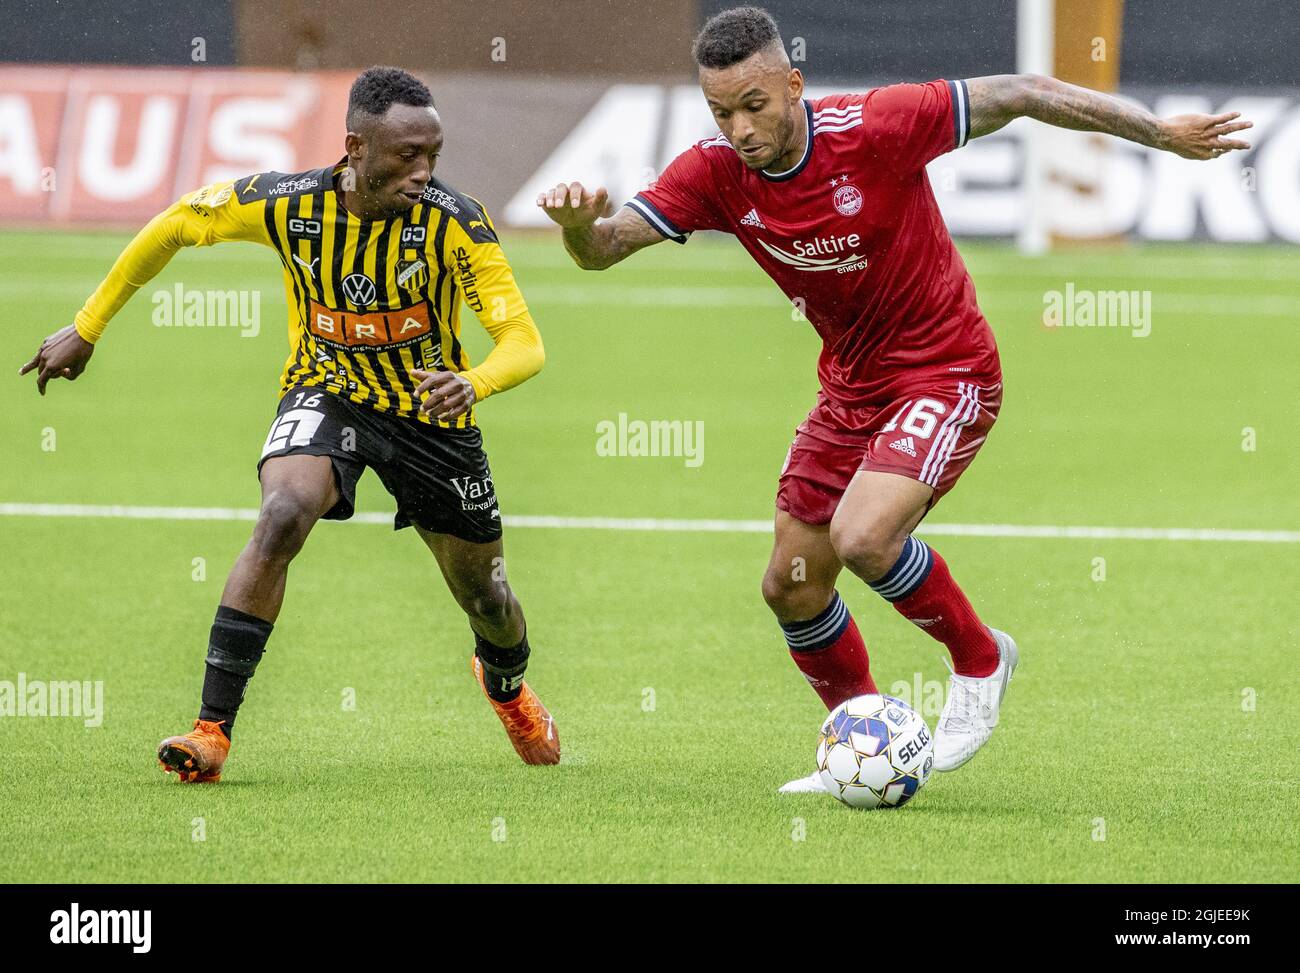 Hacken's Bénie Adama Traore and Aberdeen's Fonso Ojo during the Europa Conference League, Second Qualifying Round 2nd leg, match between BK Hacken and Aberdeen at Hisingen Arena in Gothenburg, Sweden, on July 29, 2021. Photo: Adam Ihse/TT code 9200 ***SWEDEN OUT***  Stock Photo